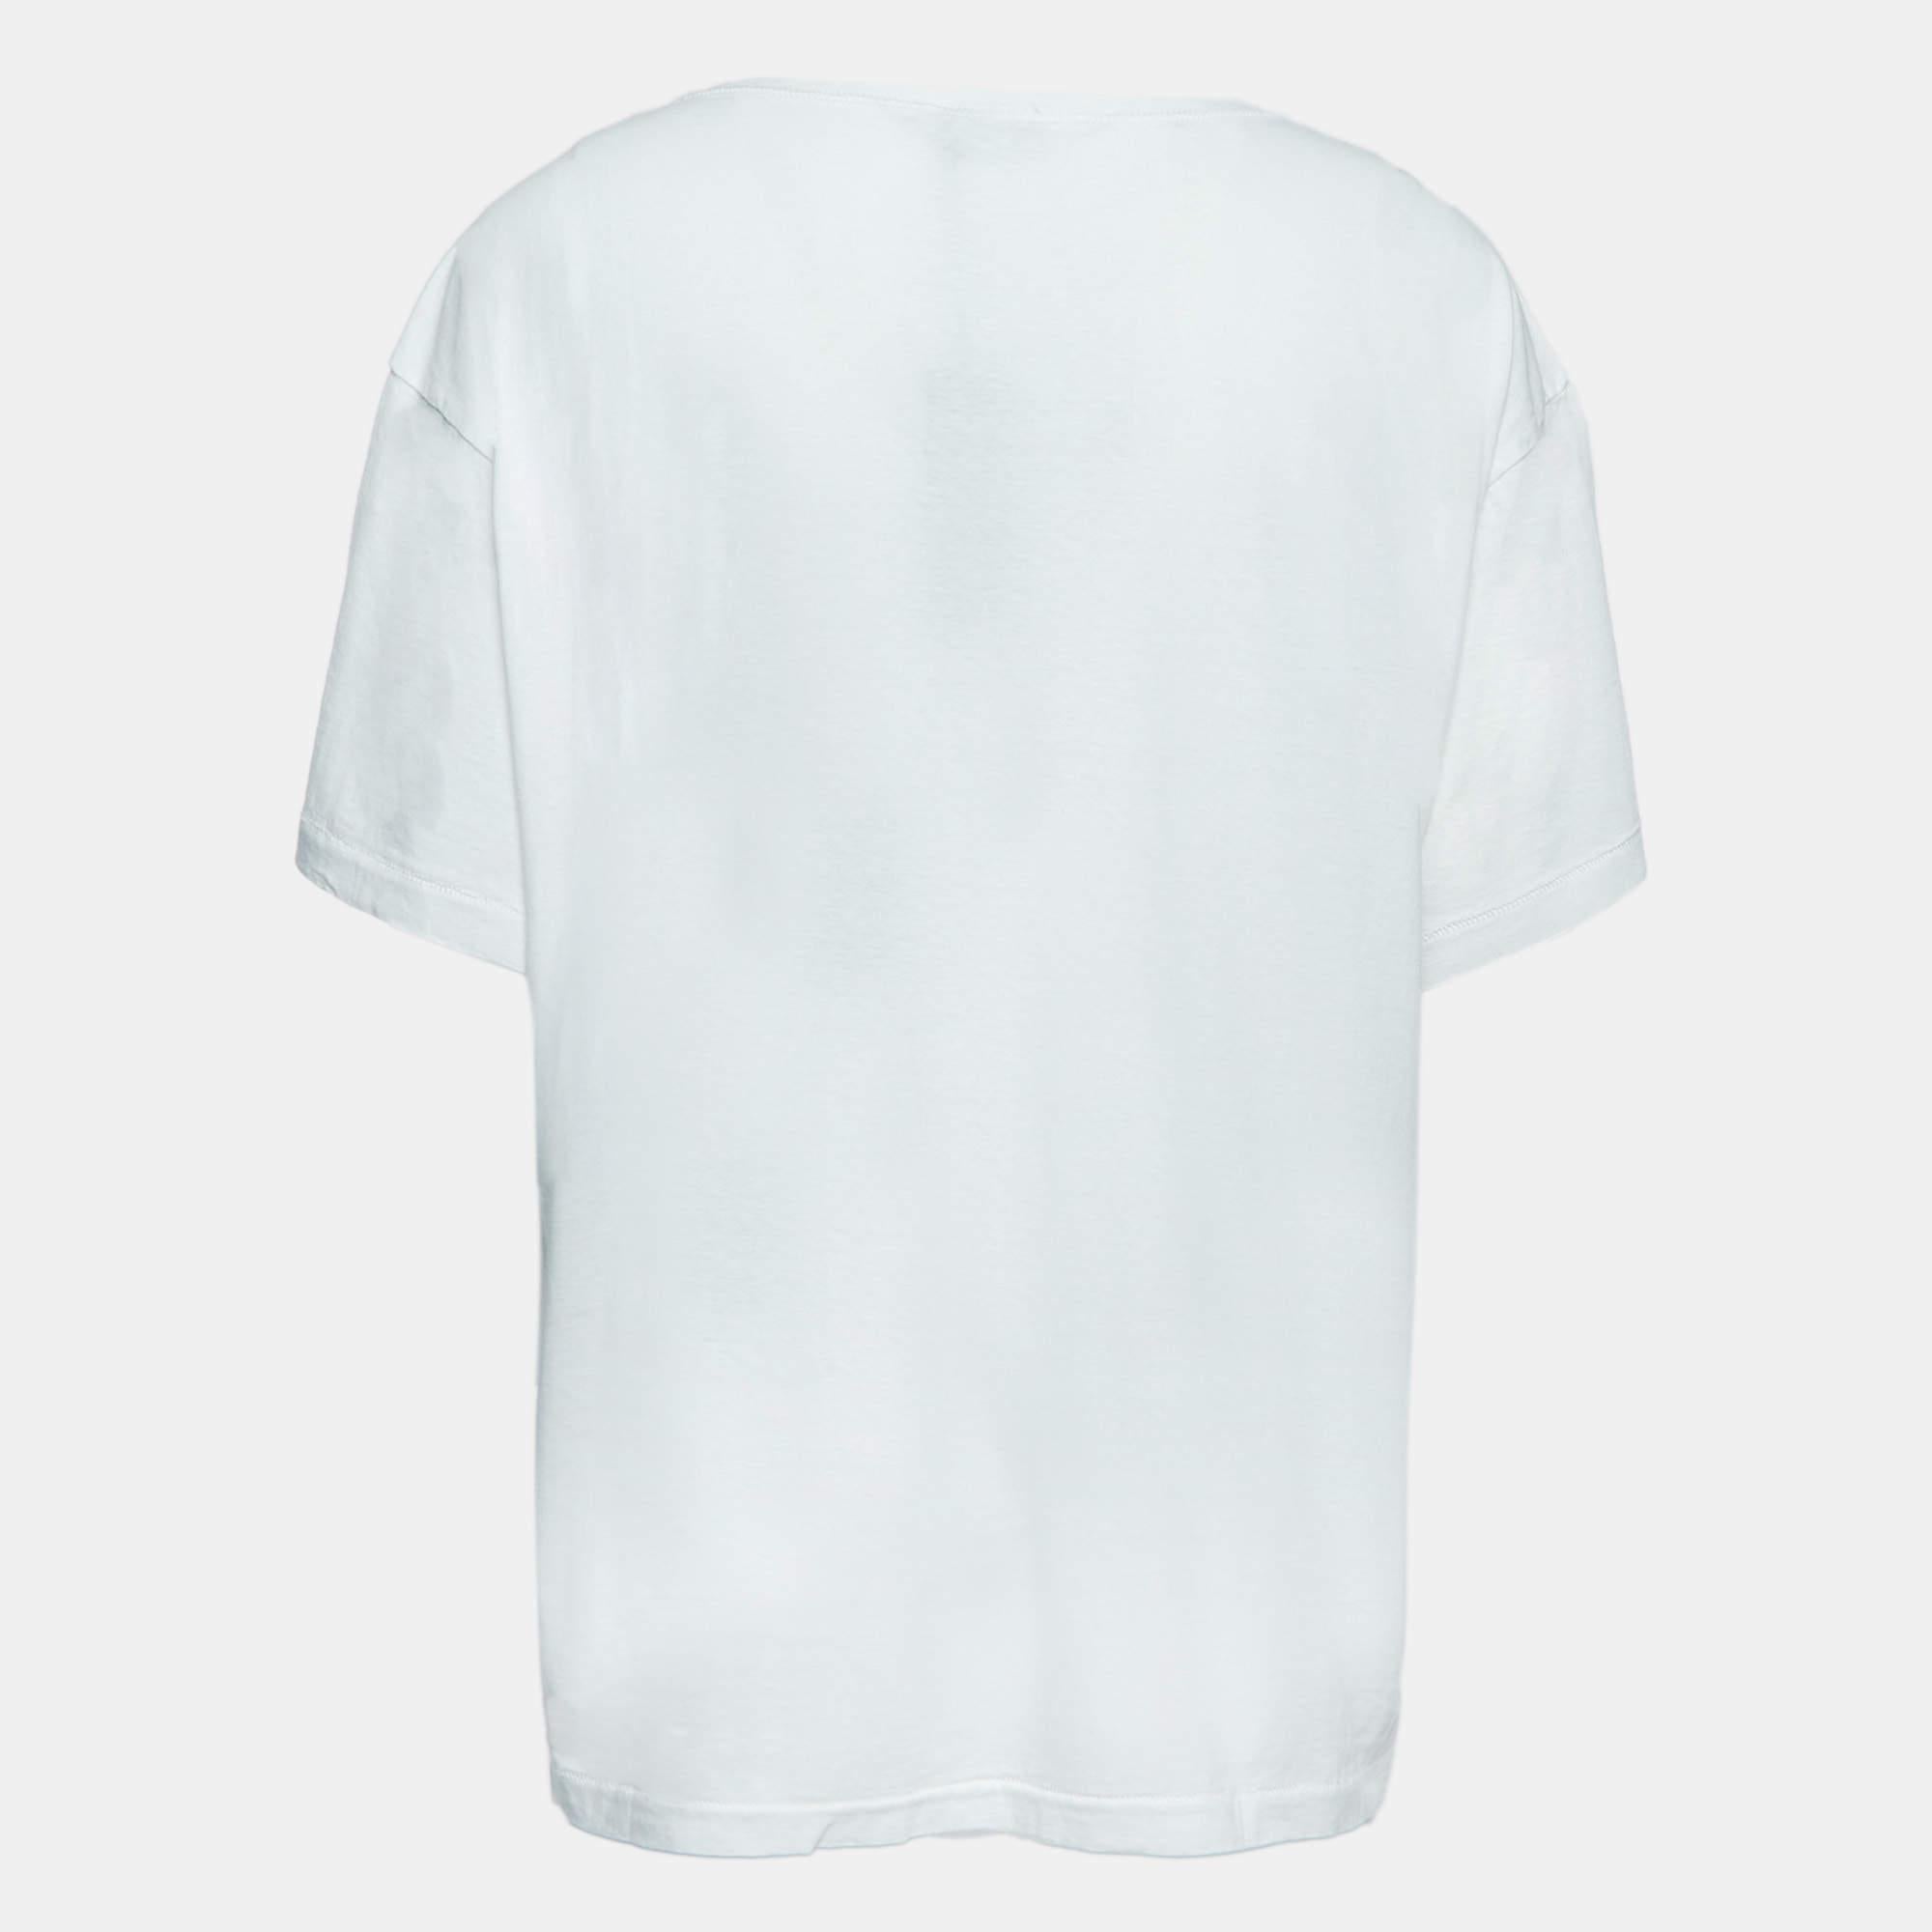 Perfect for casual outings or errands, this T-shirt is the best piece to feel comfortable and stylish in. It flaunts a catchy shade and a relaxed fit.

